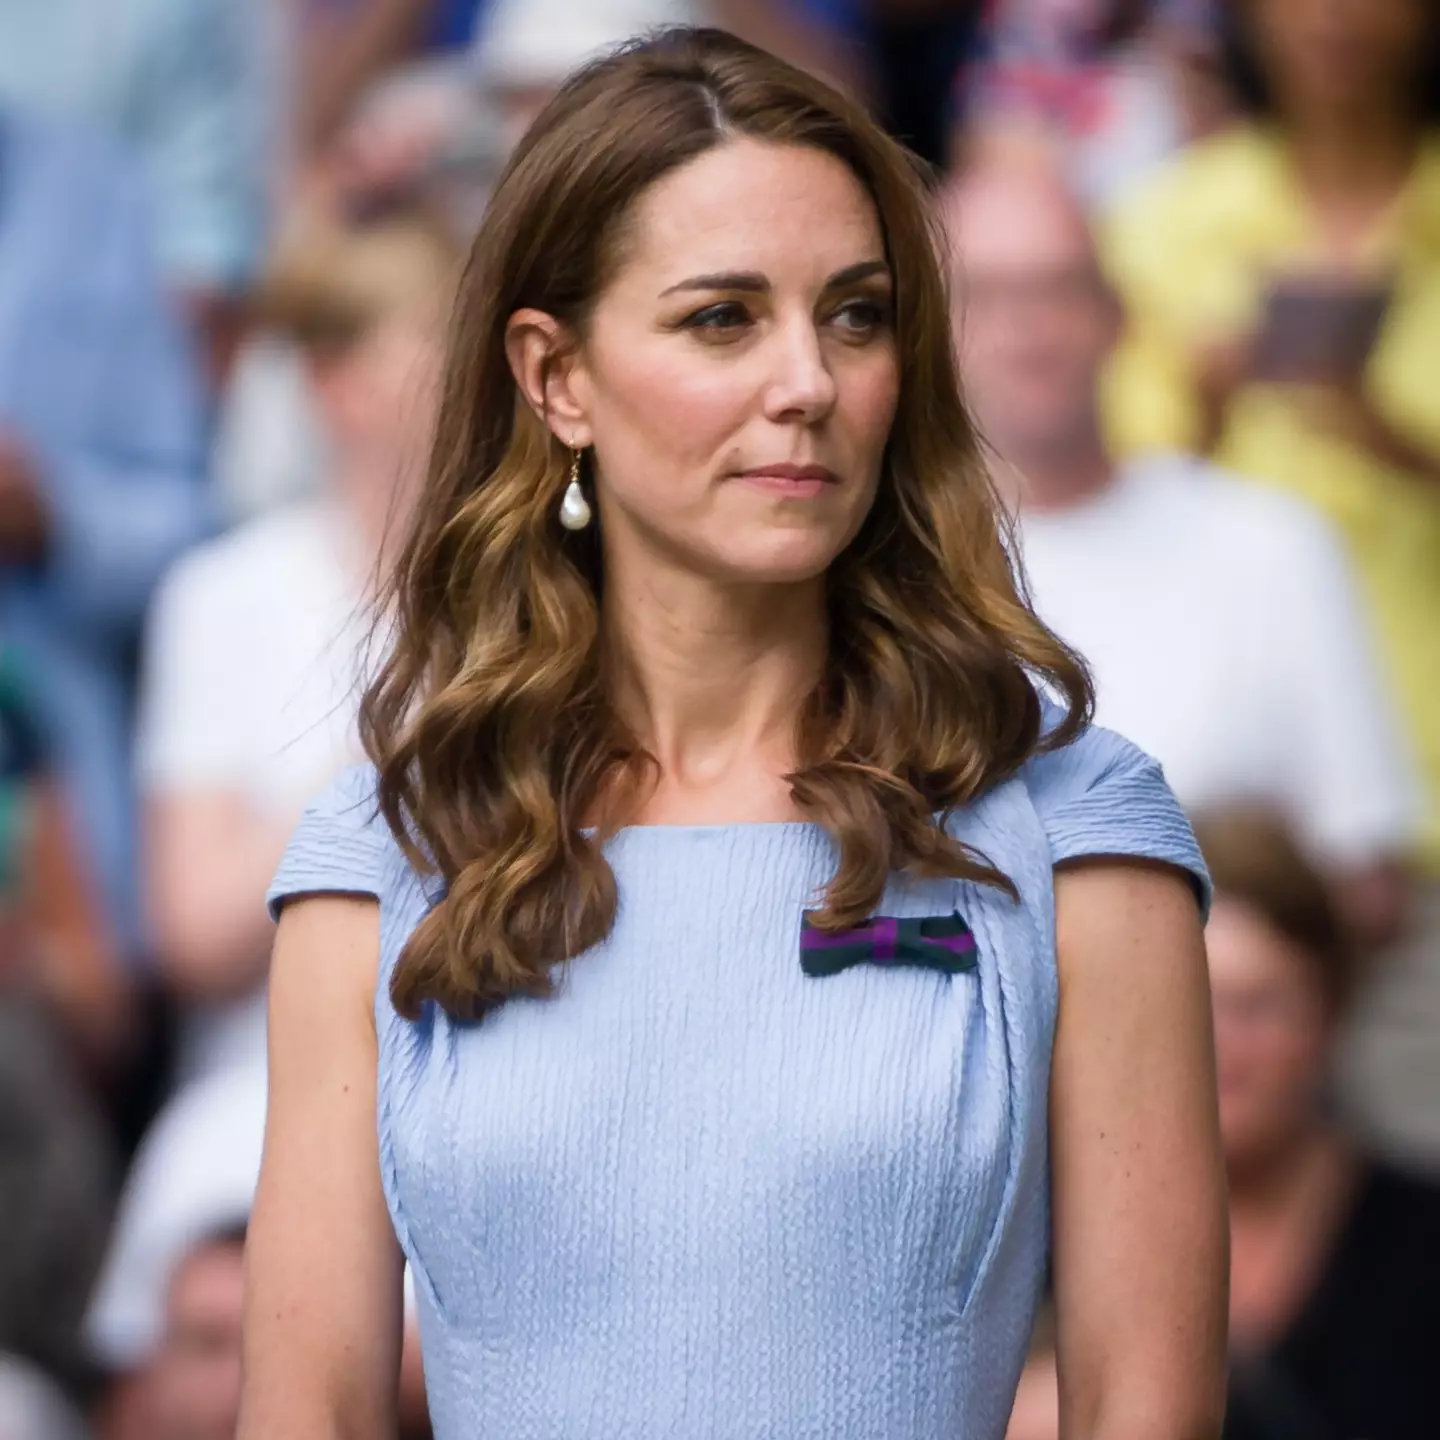 Kate Middleton said she is undergoing preventative cancer treatment.